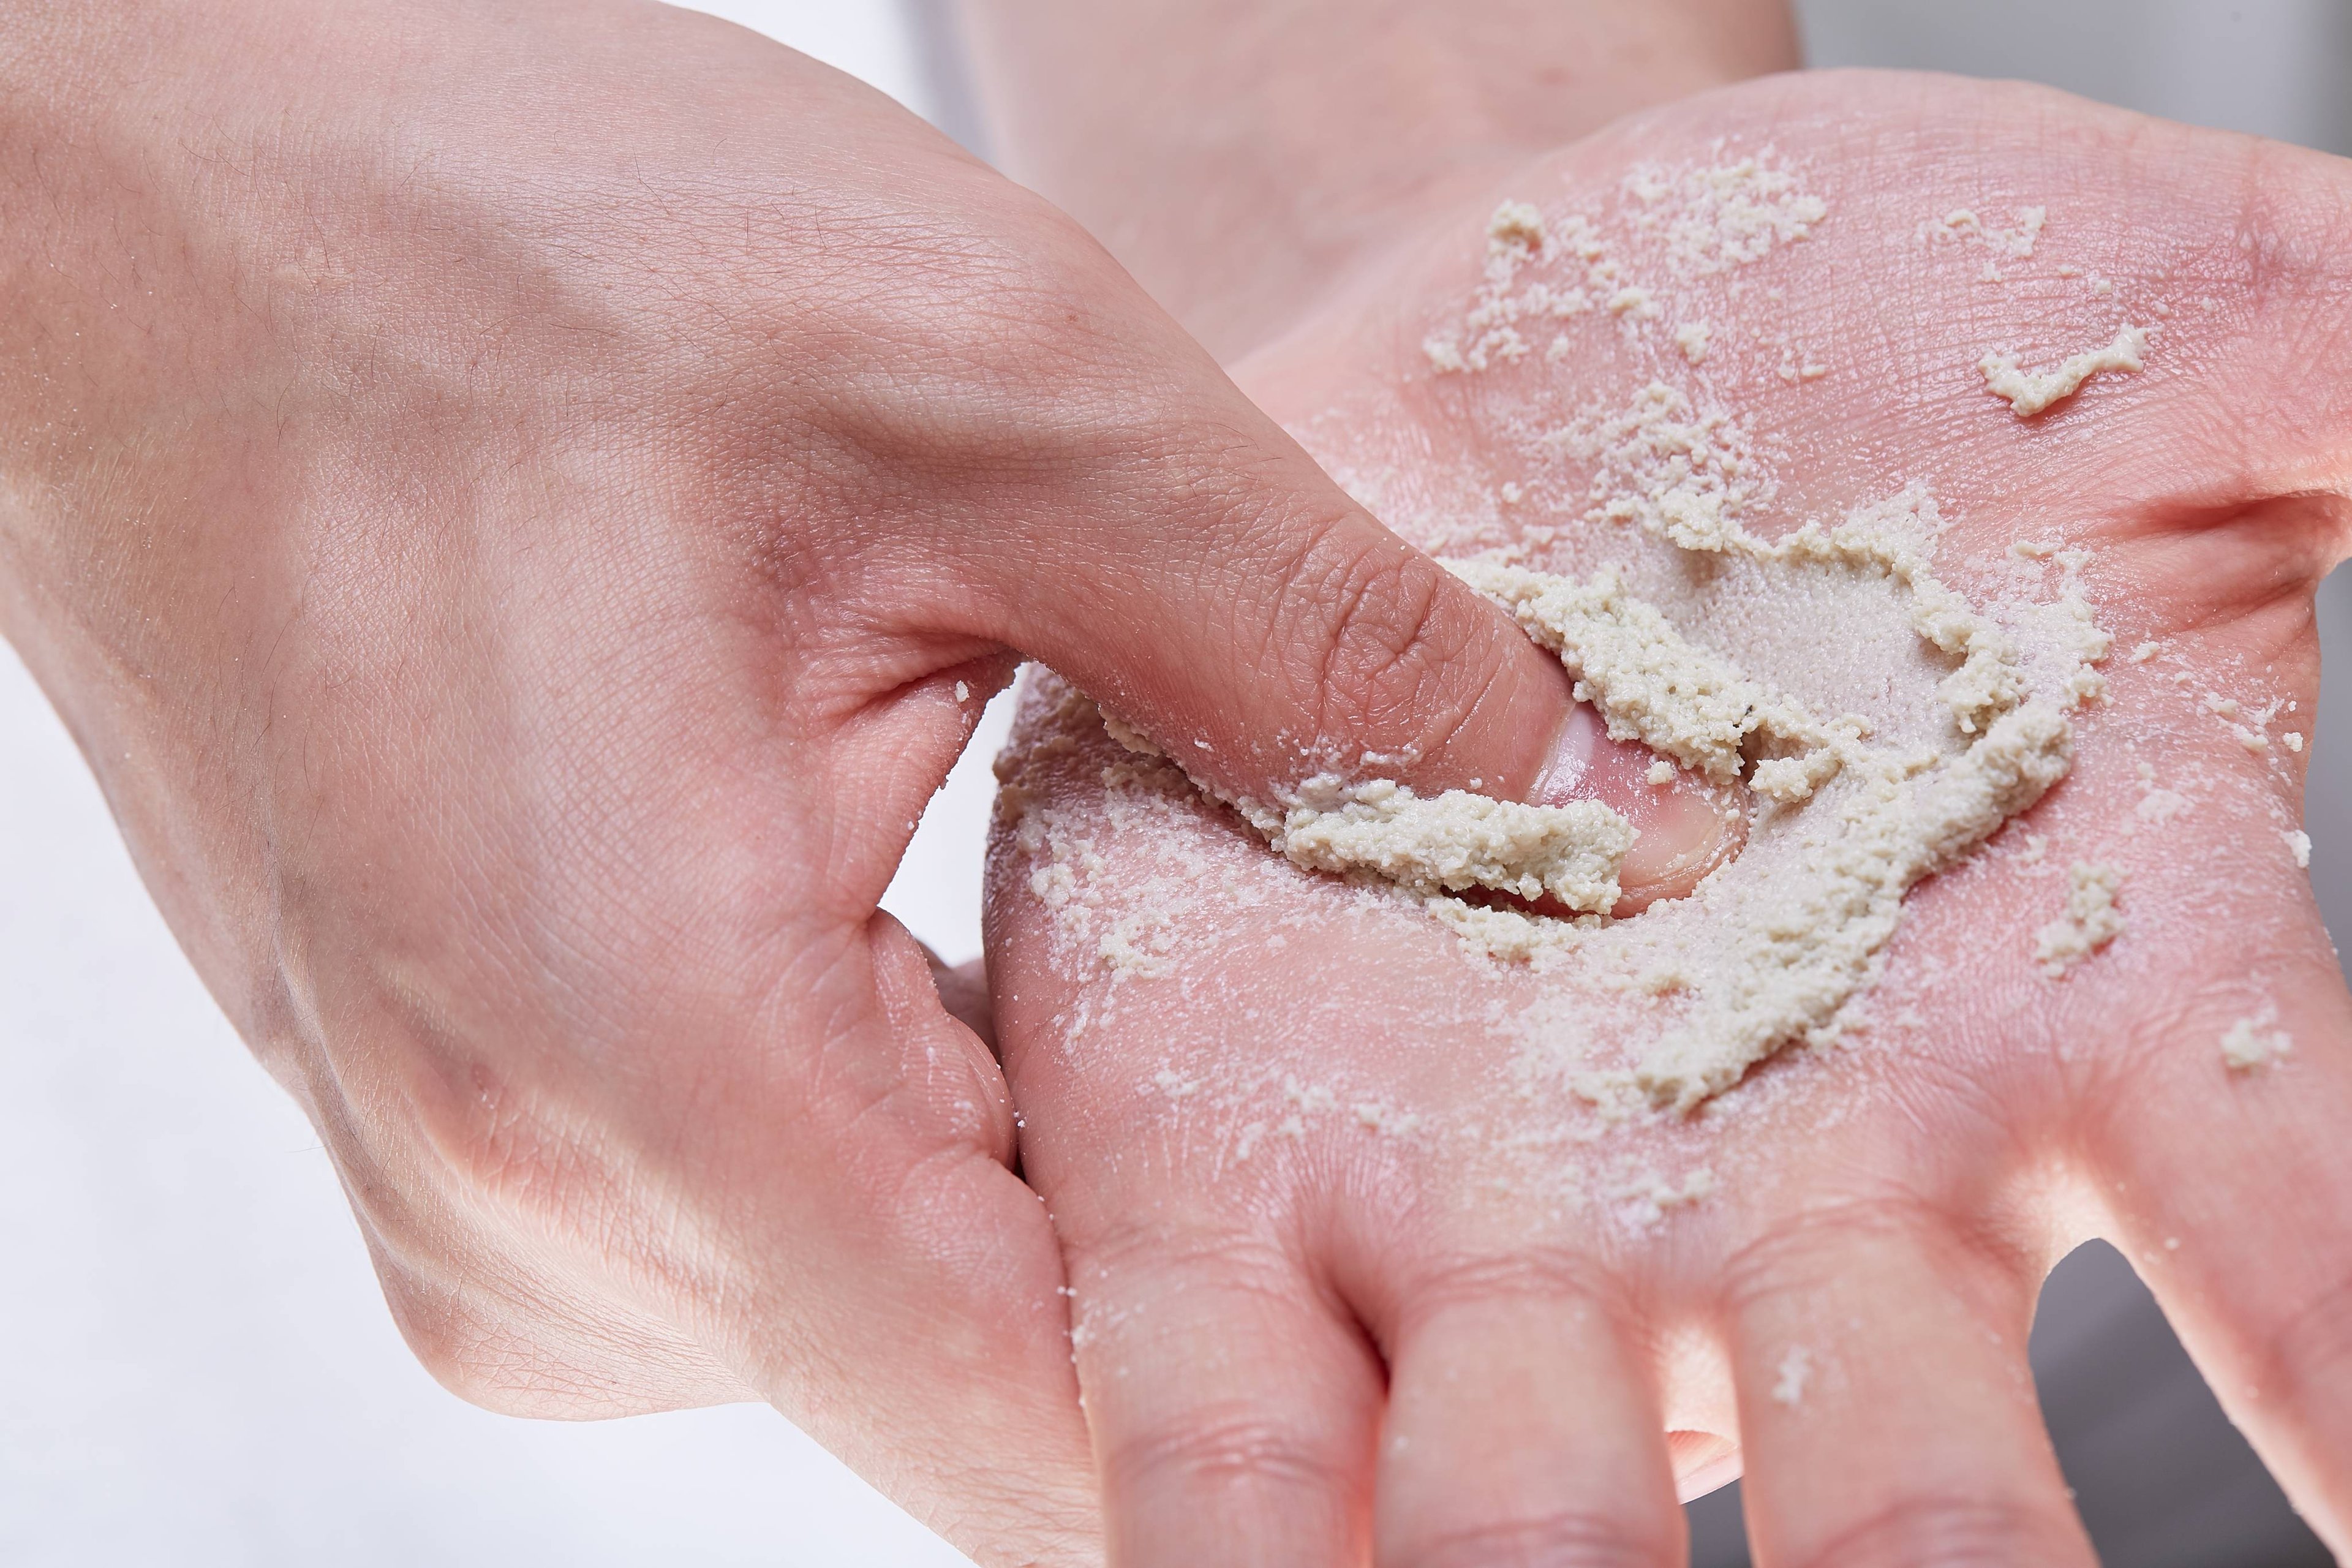 A close-up of model's hands shows Angels on Bare Skin cleanser mixed with water creating a luscious, cream paste.